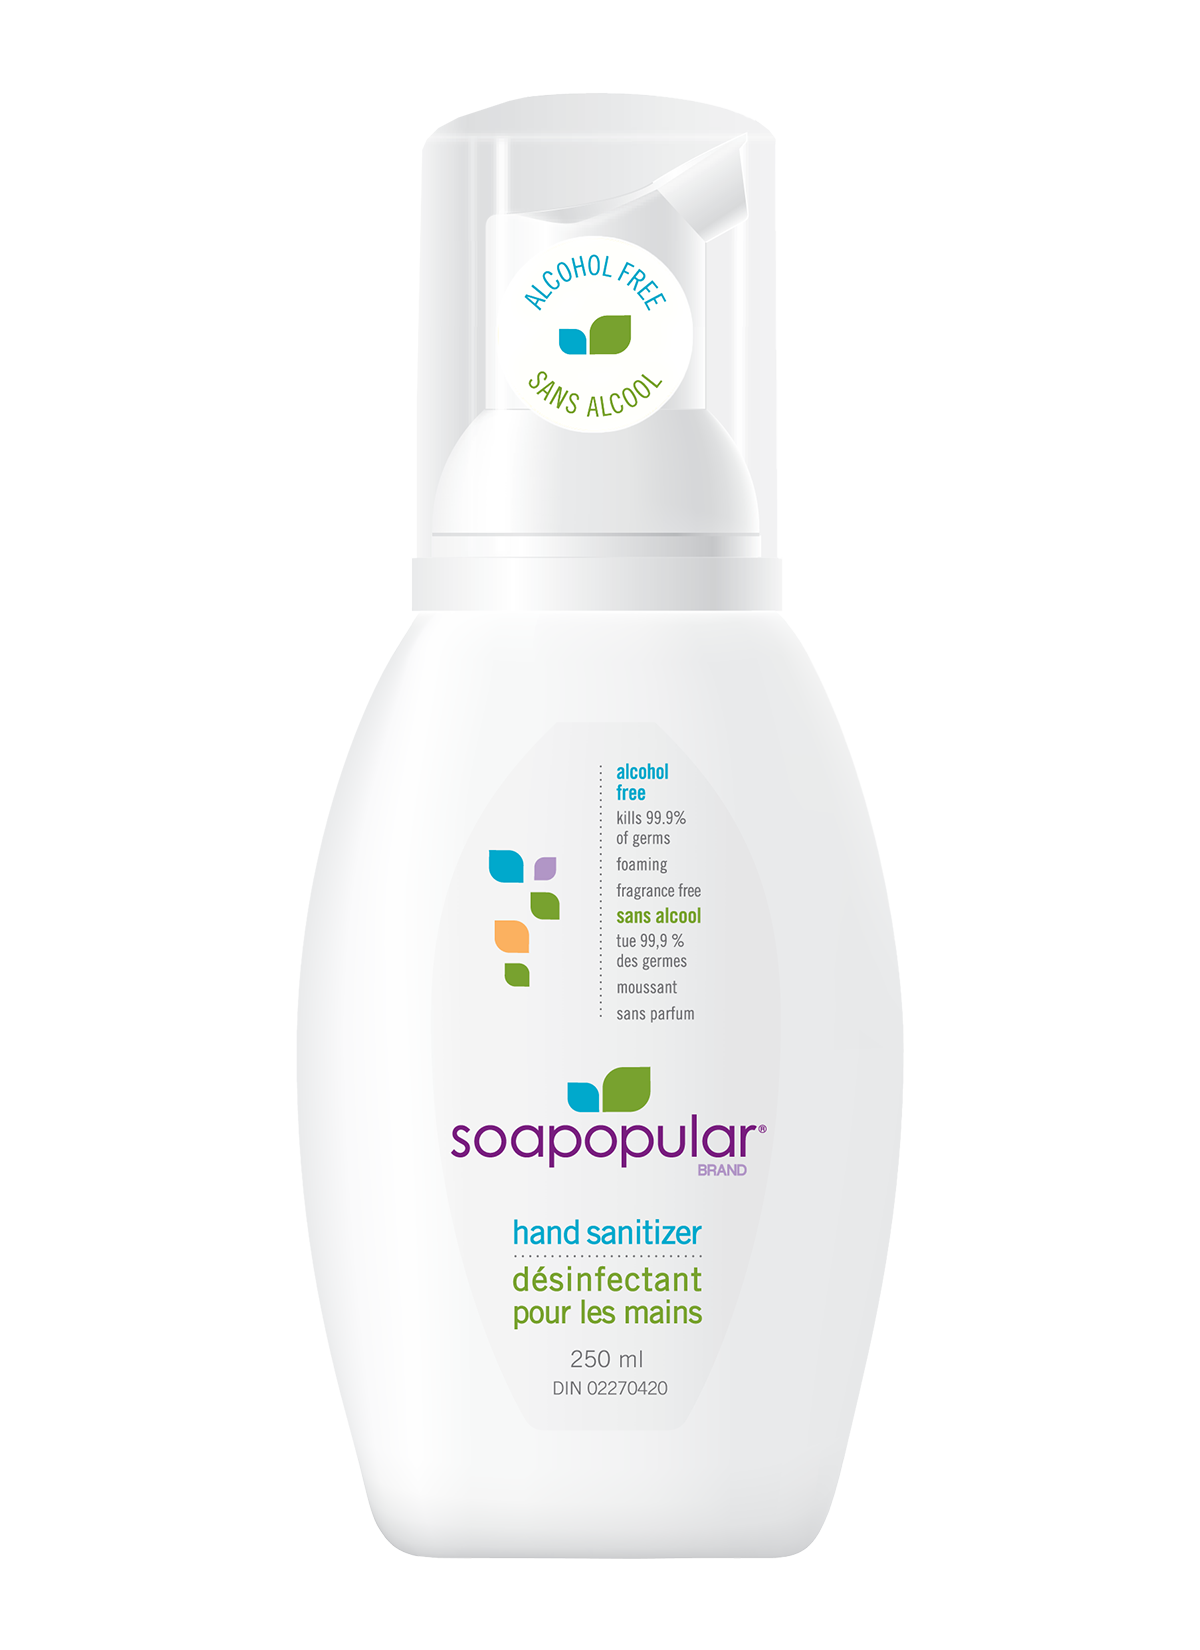 Soapopular alcohol free hand sanitizer comes in a 250mL size and applies a rich foaming formula.